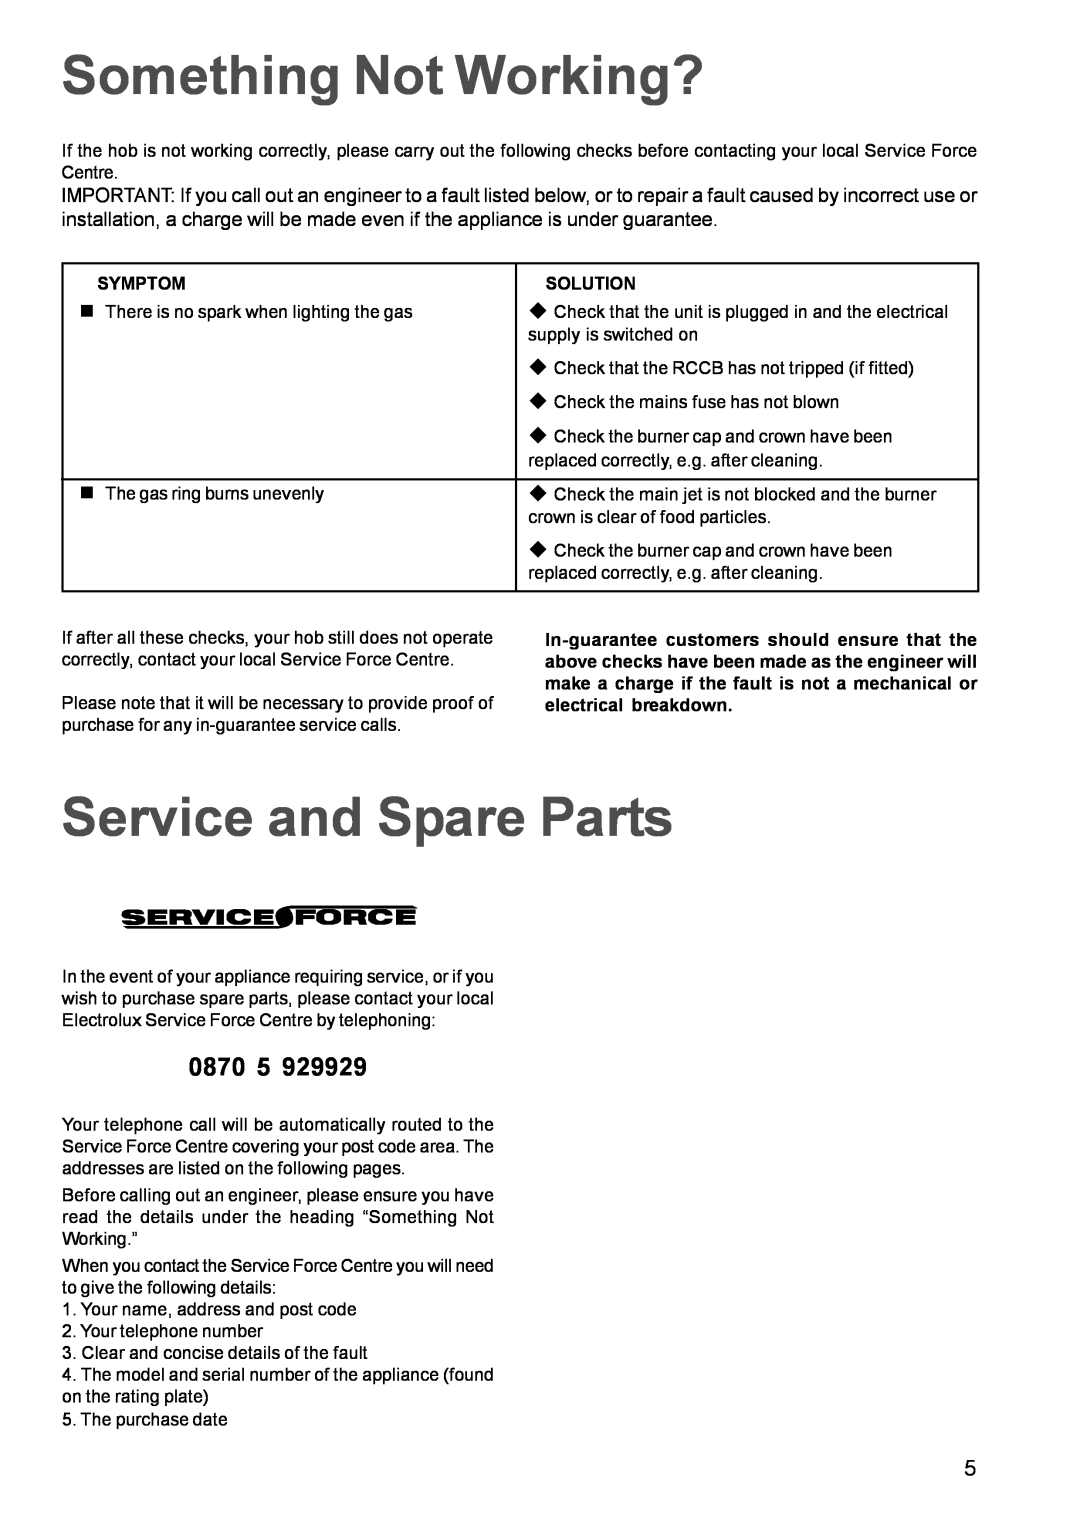 Electrolux EHG 680 manual Something Not Working?, Service and Spare Parts, 0870 5 